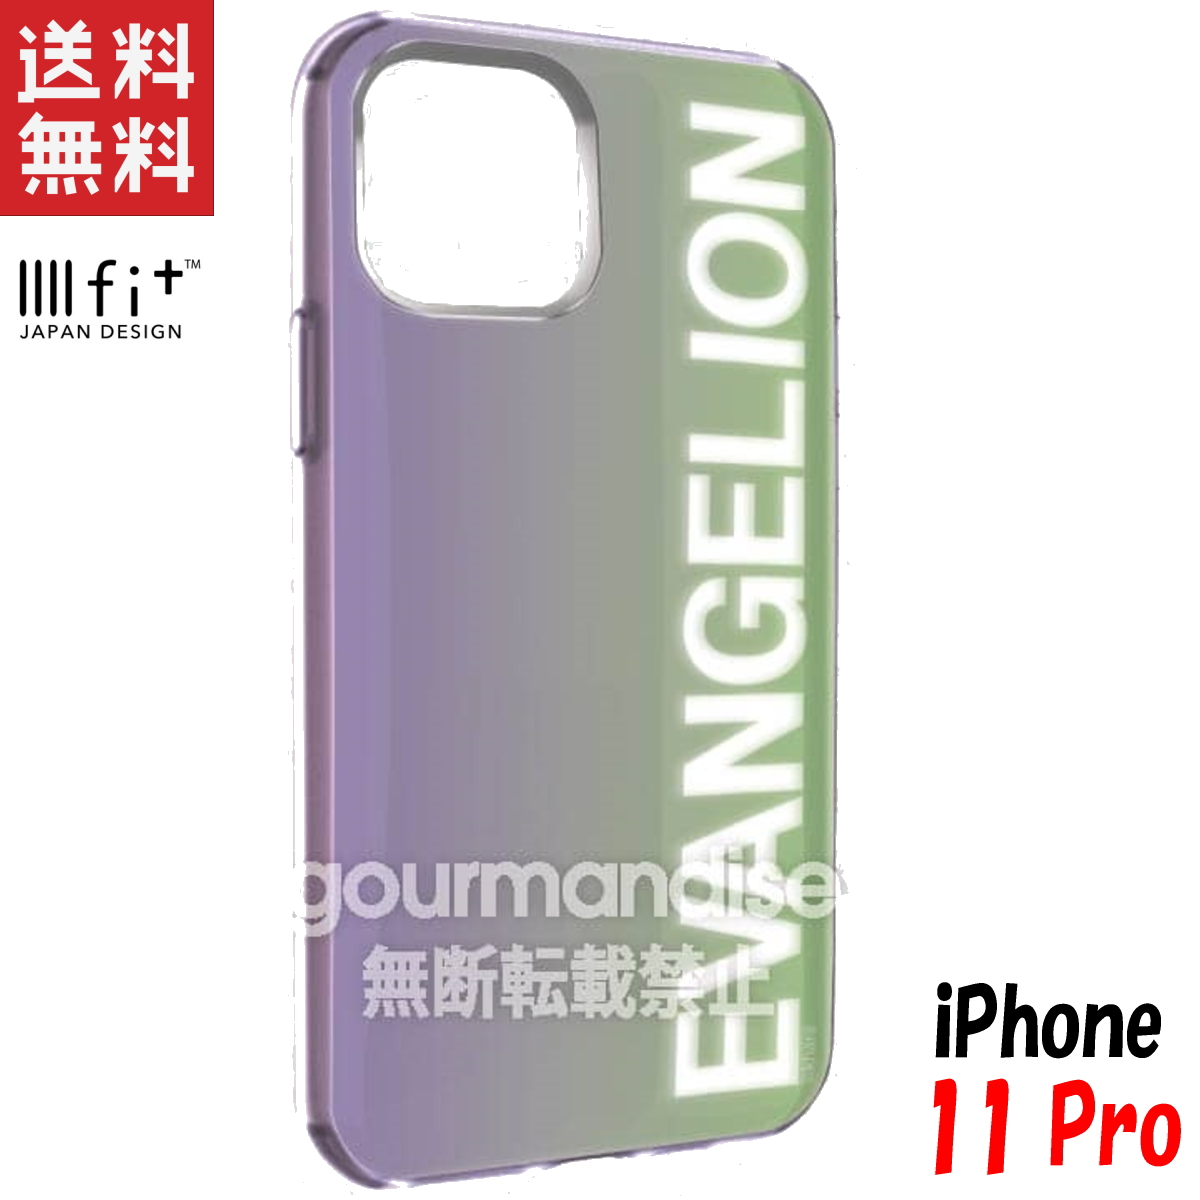 P Entamestore Evangelion Iphone11 Pro Case E Fitting Clear Iiiifit Clear Fancy Goods First Issue Machine Ev 148a It Is Going To Be Received In About The Middle In April Rakuten Global